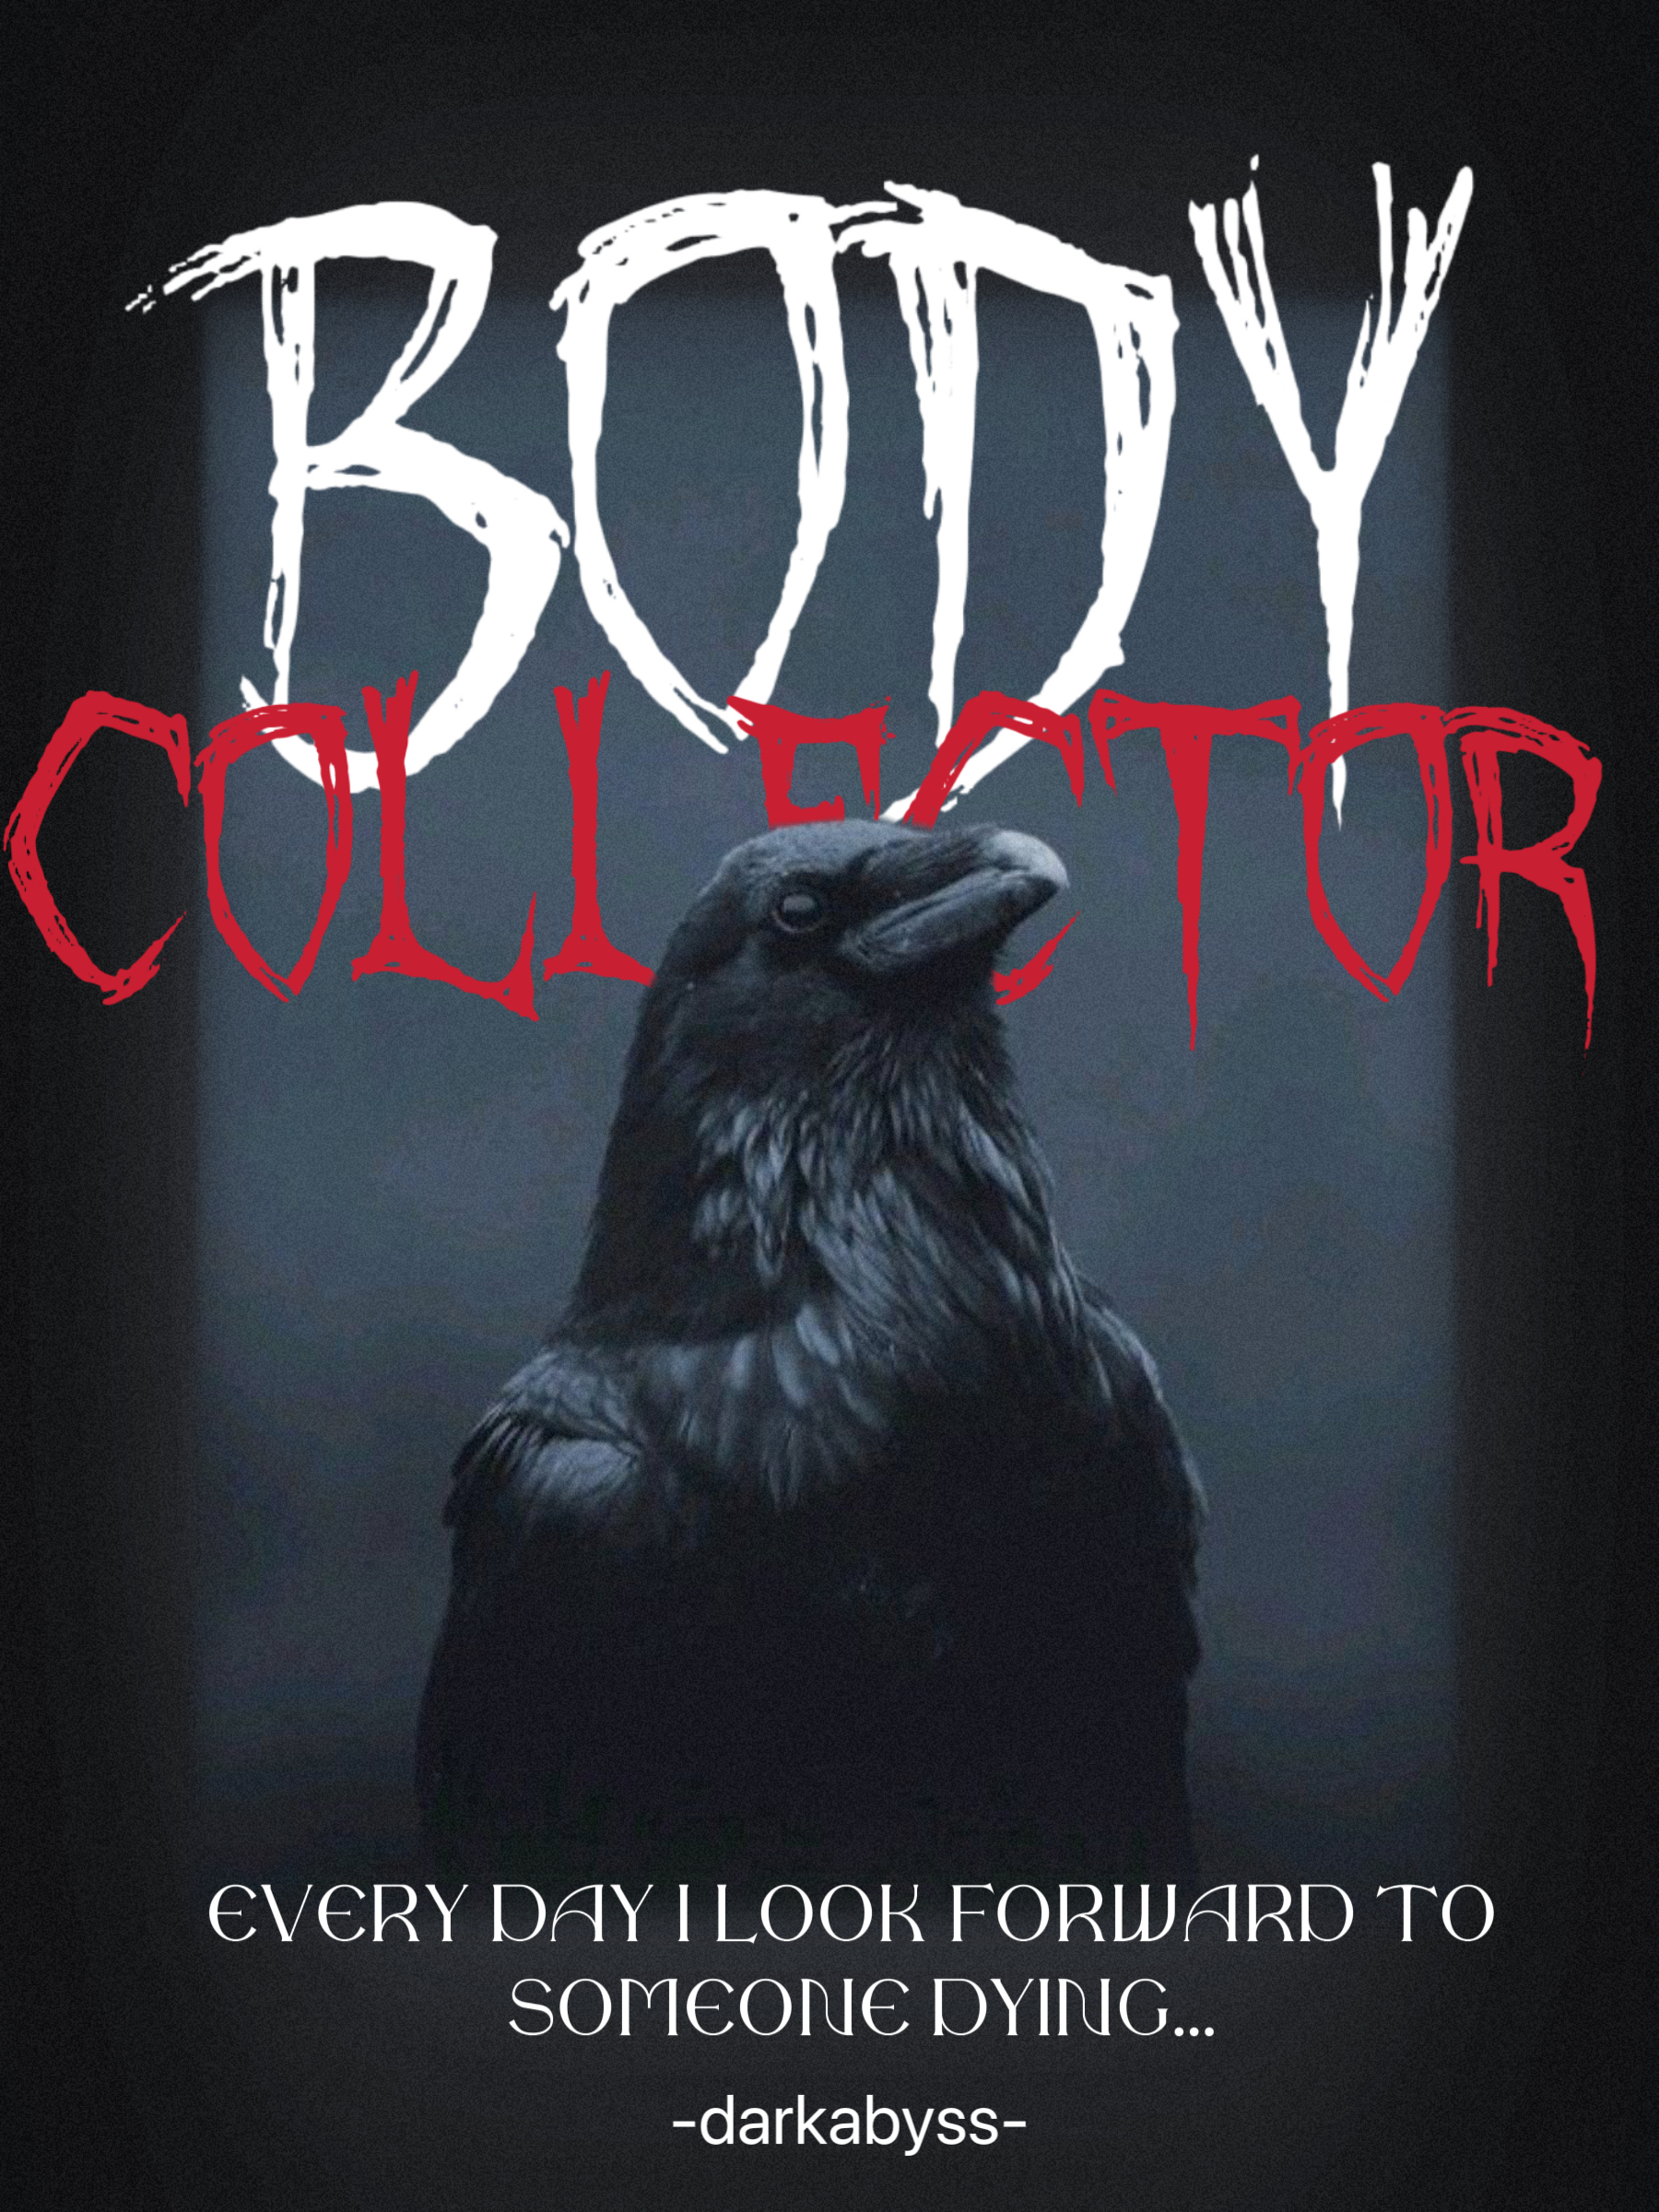 BODY COLLECTOR